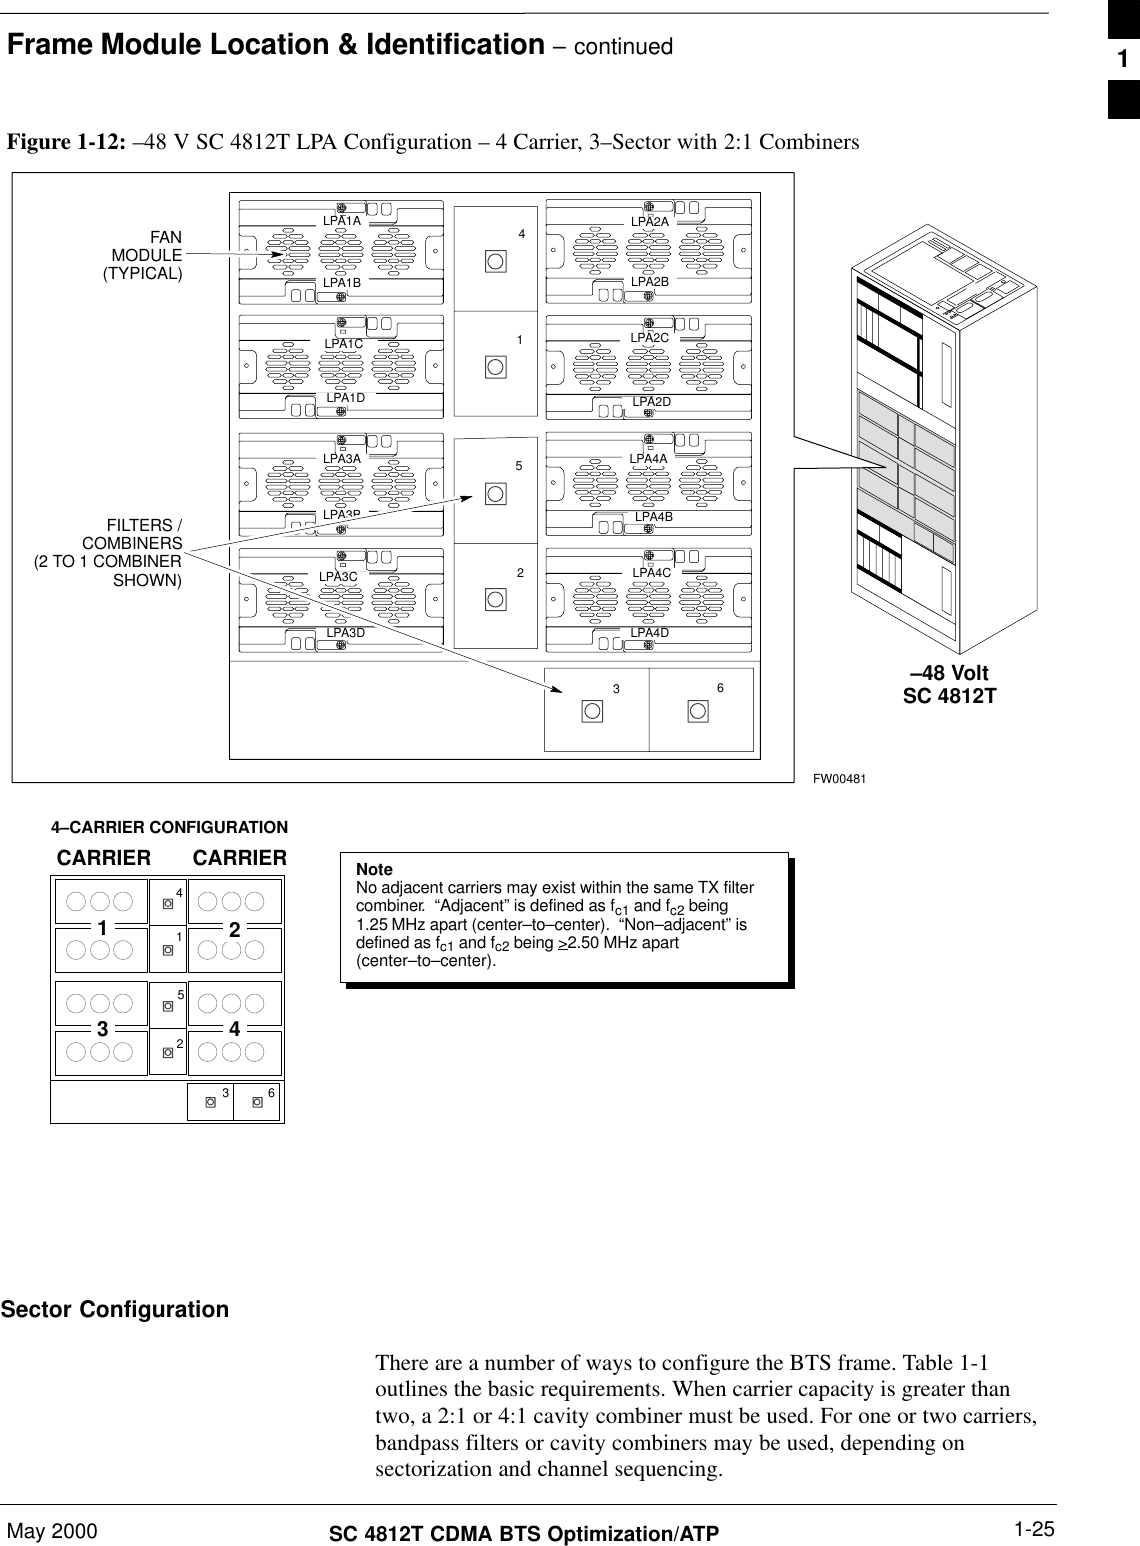 Frame Module Location &amp; Identification – continuedMay 2000 1-25SC 4812T CDMA BTS Optimization/ATPFigure 1-12: –48 V SC 4812T LPA Configuration – 4 Carrier, 3–Sector with 2:1 CombinersLPA1ALPA1BNoteNo adjacent carriers may exist within the same TX filtercombiner.  “Adjacent” is defined as fc1 and fc2 being1.25 MHz apart (center–to–center).  “Non–adjacent” isdefined as fc1 and fc2 being &gt;2.50 MHz apart(center–to–center).4–CARRIER CONFIGURATIONCARRIER CARRIERLPA1CLPA1DLPA3CLPA3DLPA2ALPA2BLPA2CLPA2DLPA4CLPA4DFW00481123456123 4123456LPA3ALPA3BLPA4ALPA4BFANMODULE(TYPICAL)FILTERS /COMBINERS(2 TO 1 COMBINERSHOWN)–48 VoltSC 4812TSector ConfigurationThere are a number of ways to configure the BTS frame. Table 1-1outlines the basic requirements. When carrier capacity is greater thantwo, a 2:1 or 4:1 cavity combiner must be used. For one or two carriers,bandpass filters or cavity combiners may be used, depending onsectorization and channel sequencing.1